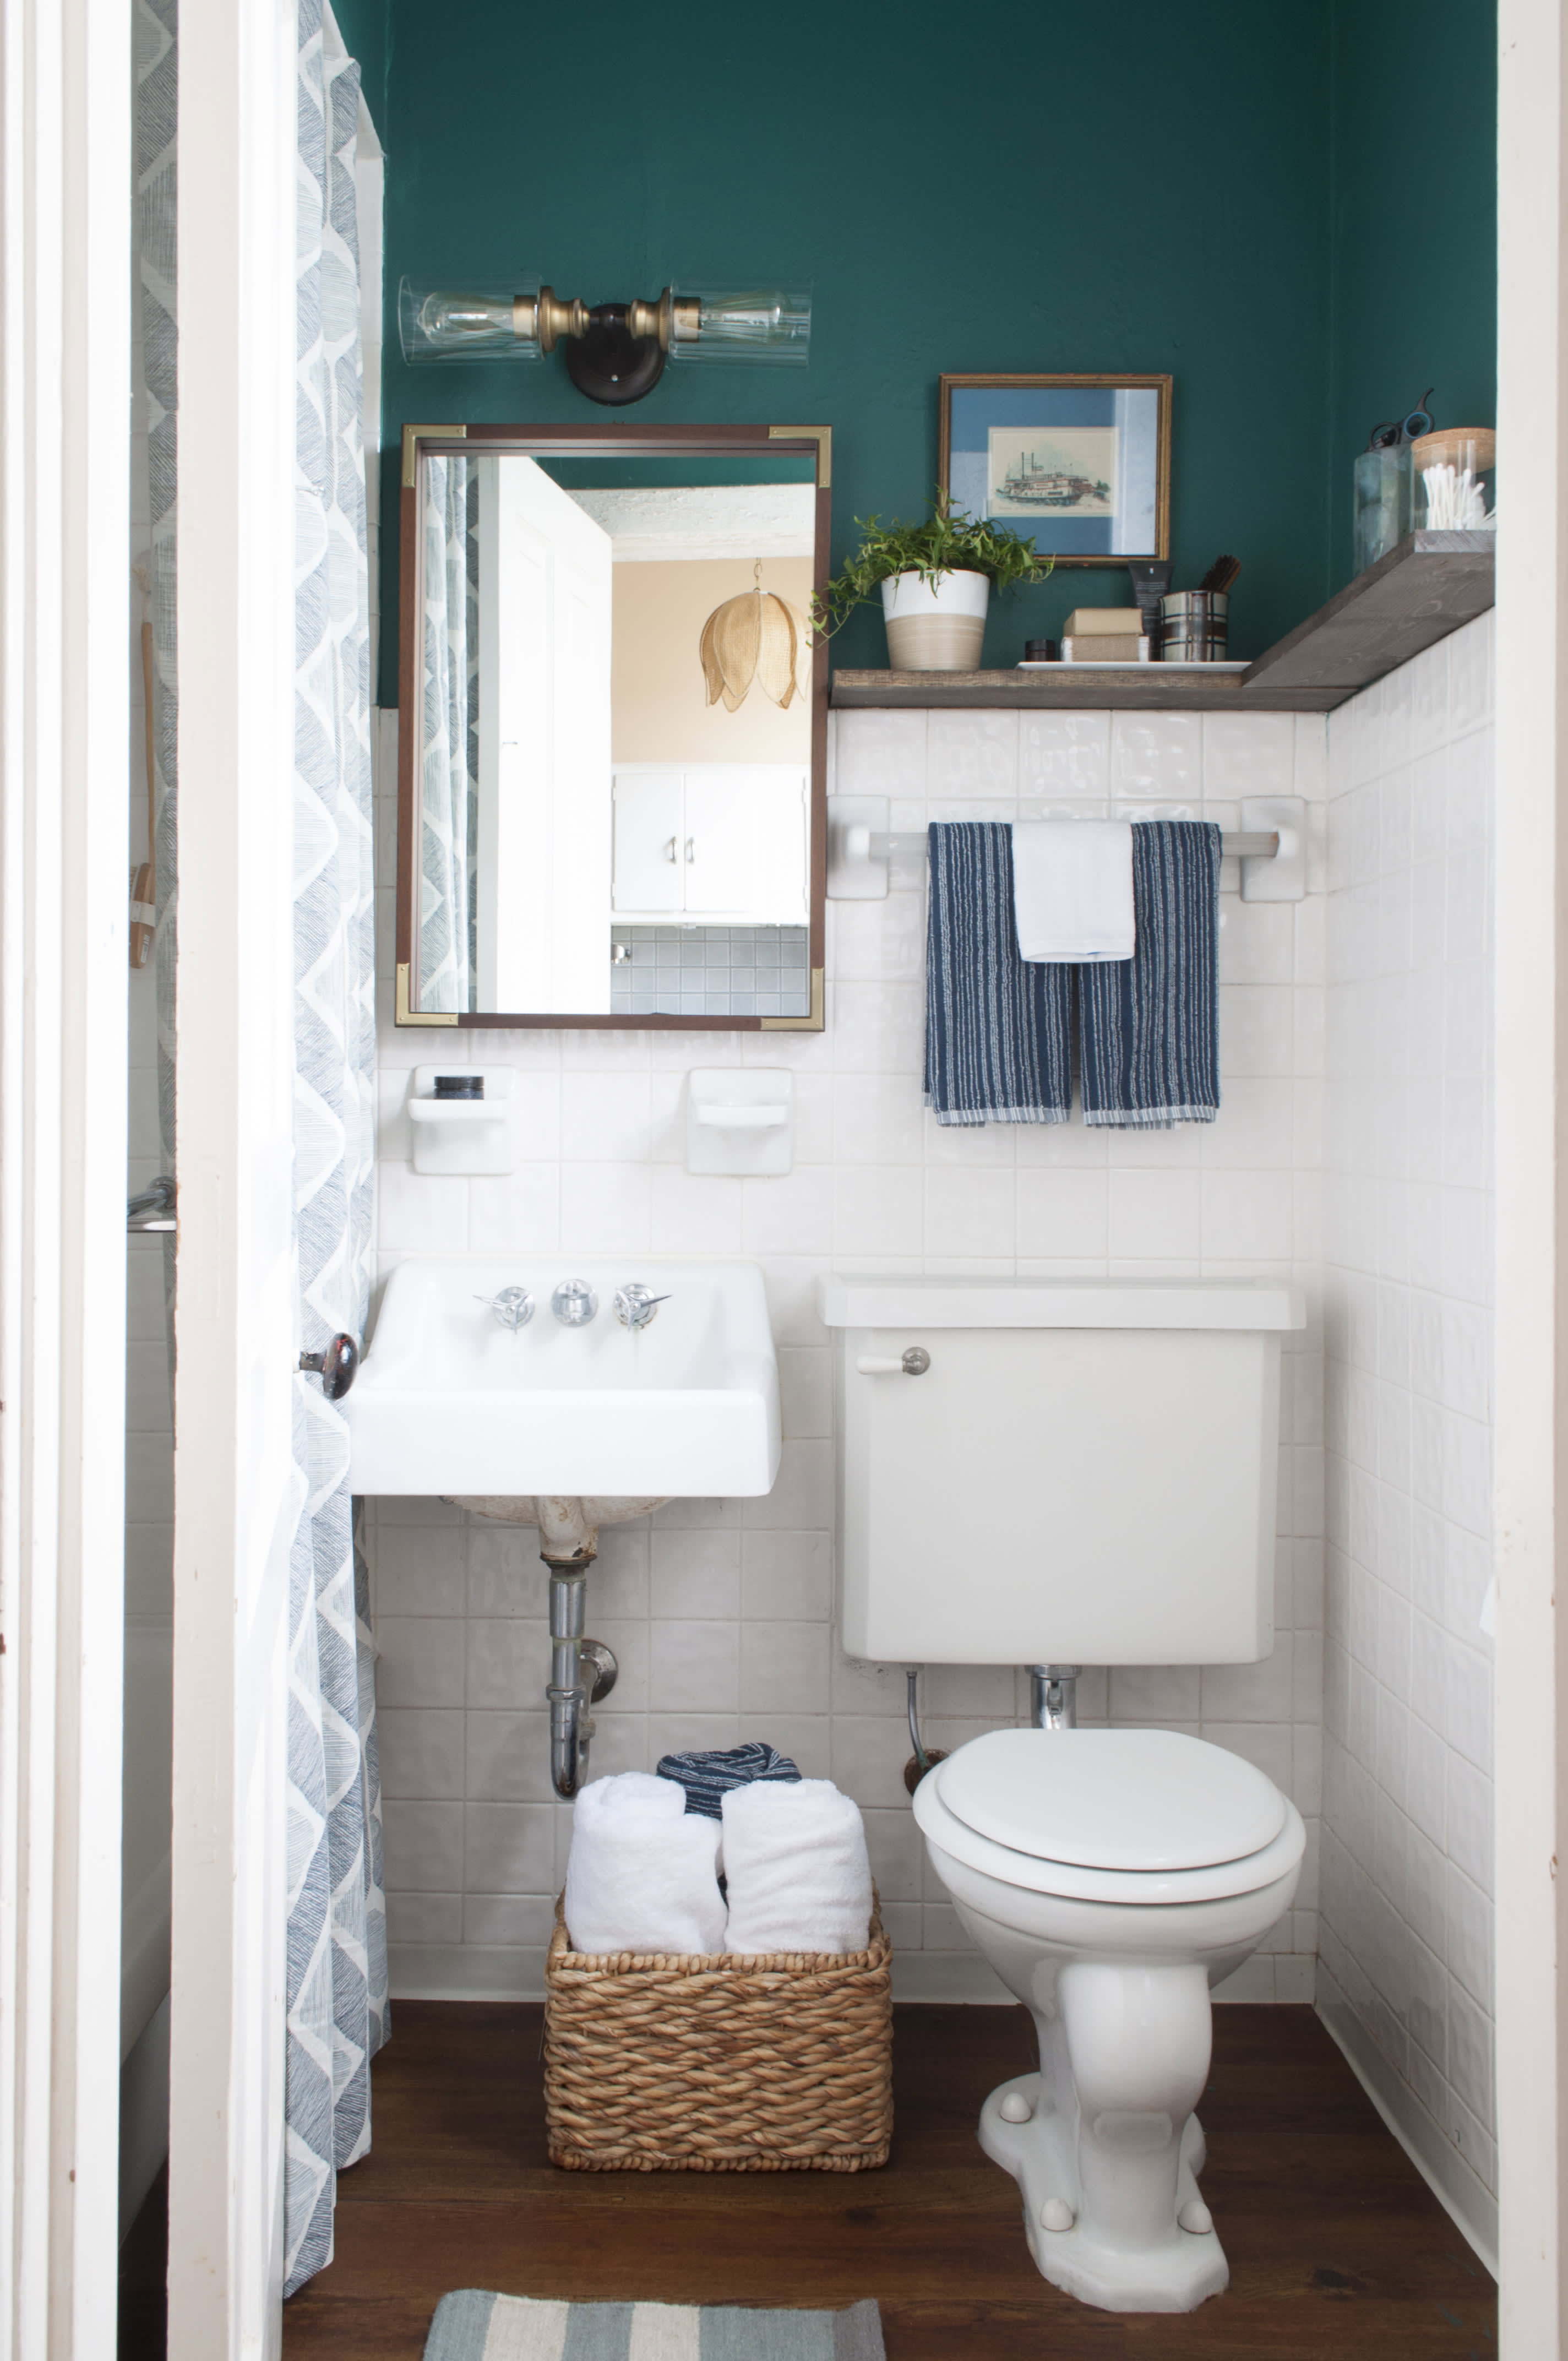 How to Cover Damaged Bathroom Walls on a Budget